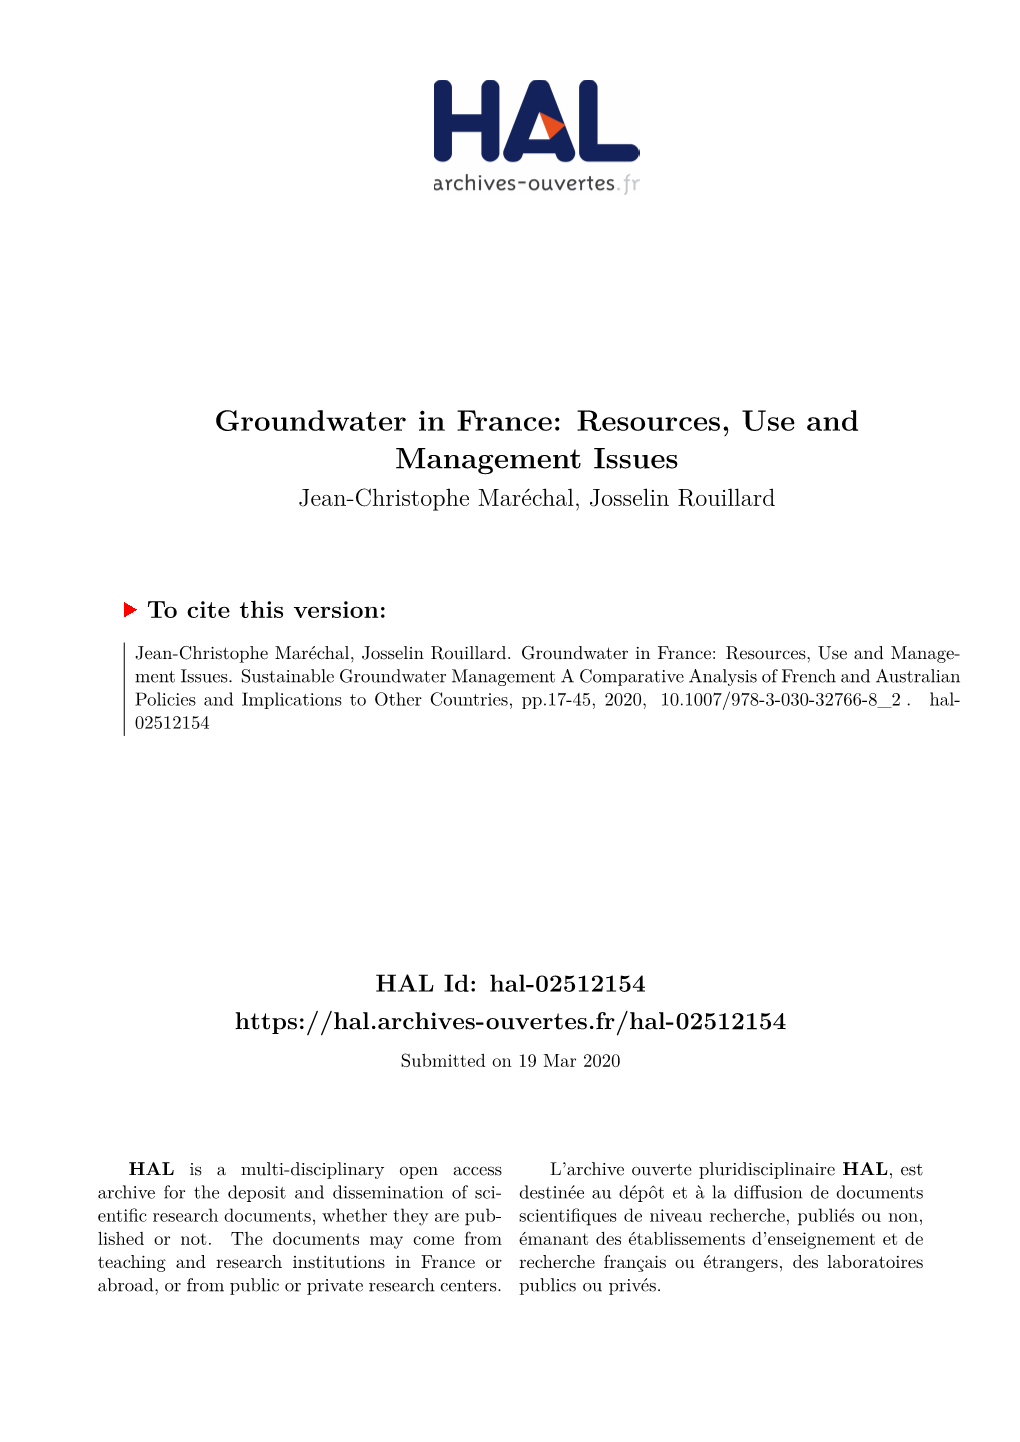 Groundwater in France: Resources, Use and Management Issues Jean-Christophe Maréchal, Josselin Rouillard